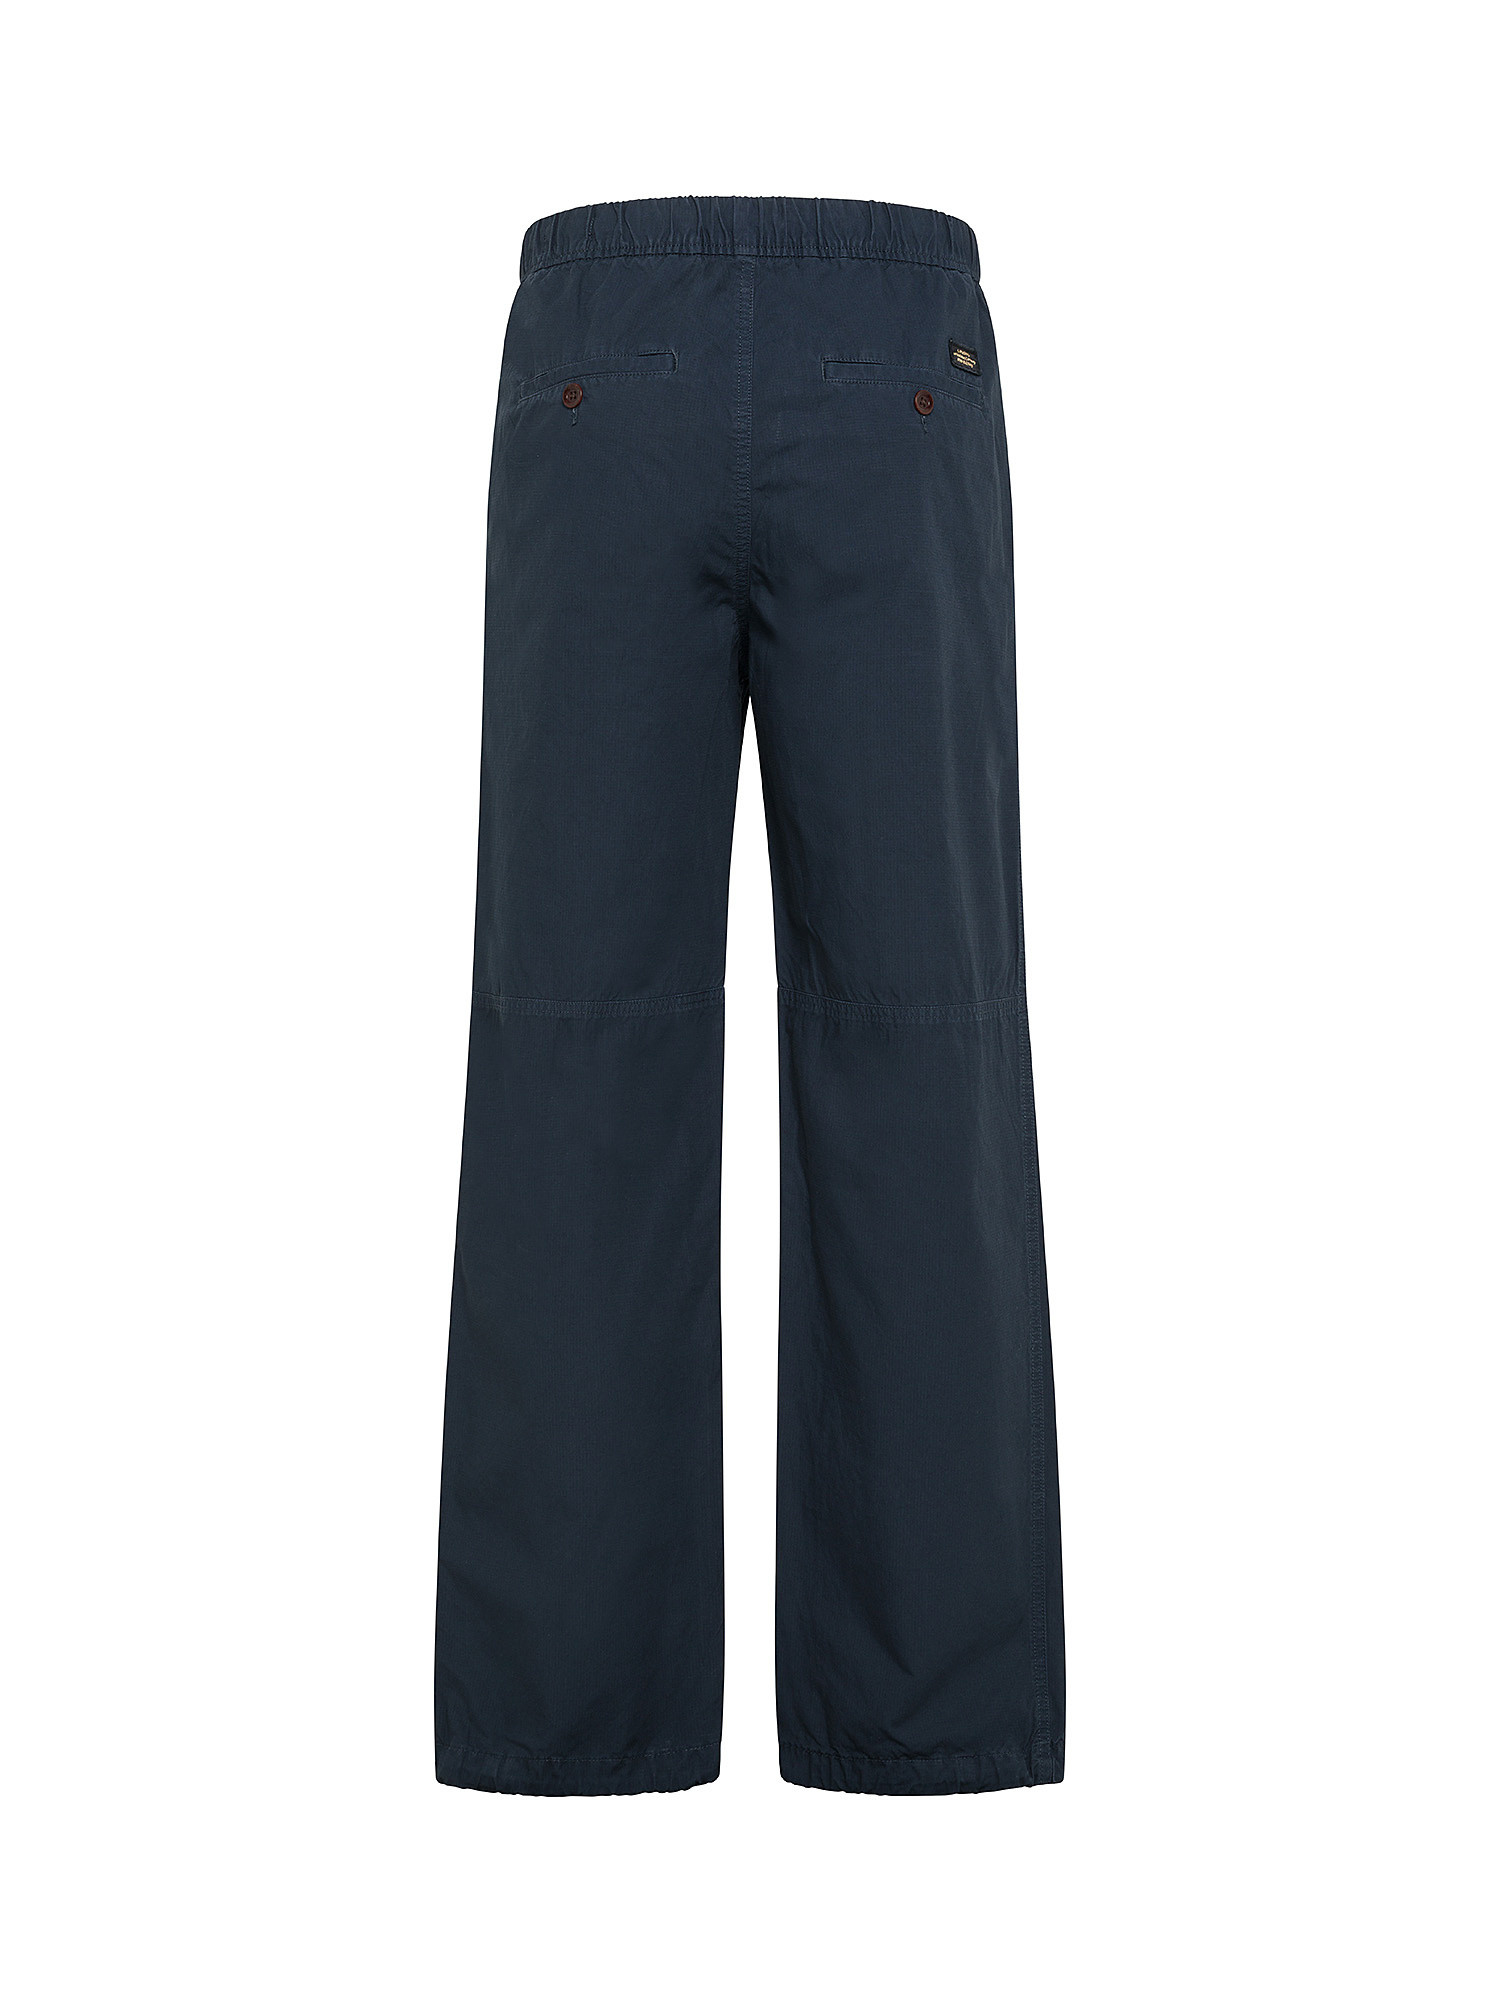 Superdry Cotton Canvas Trousers, Blue, large image number 1